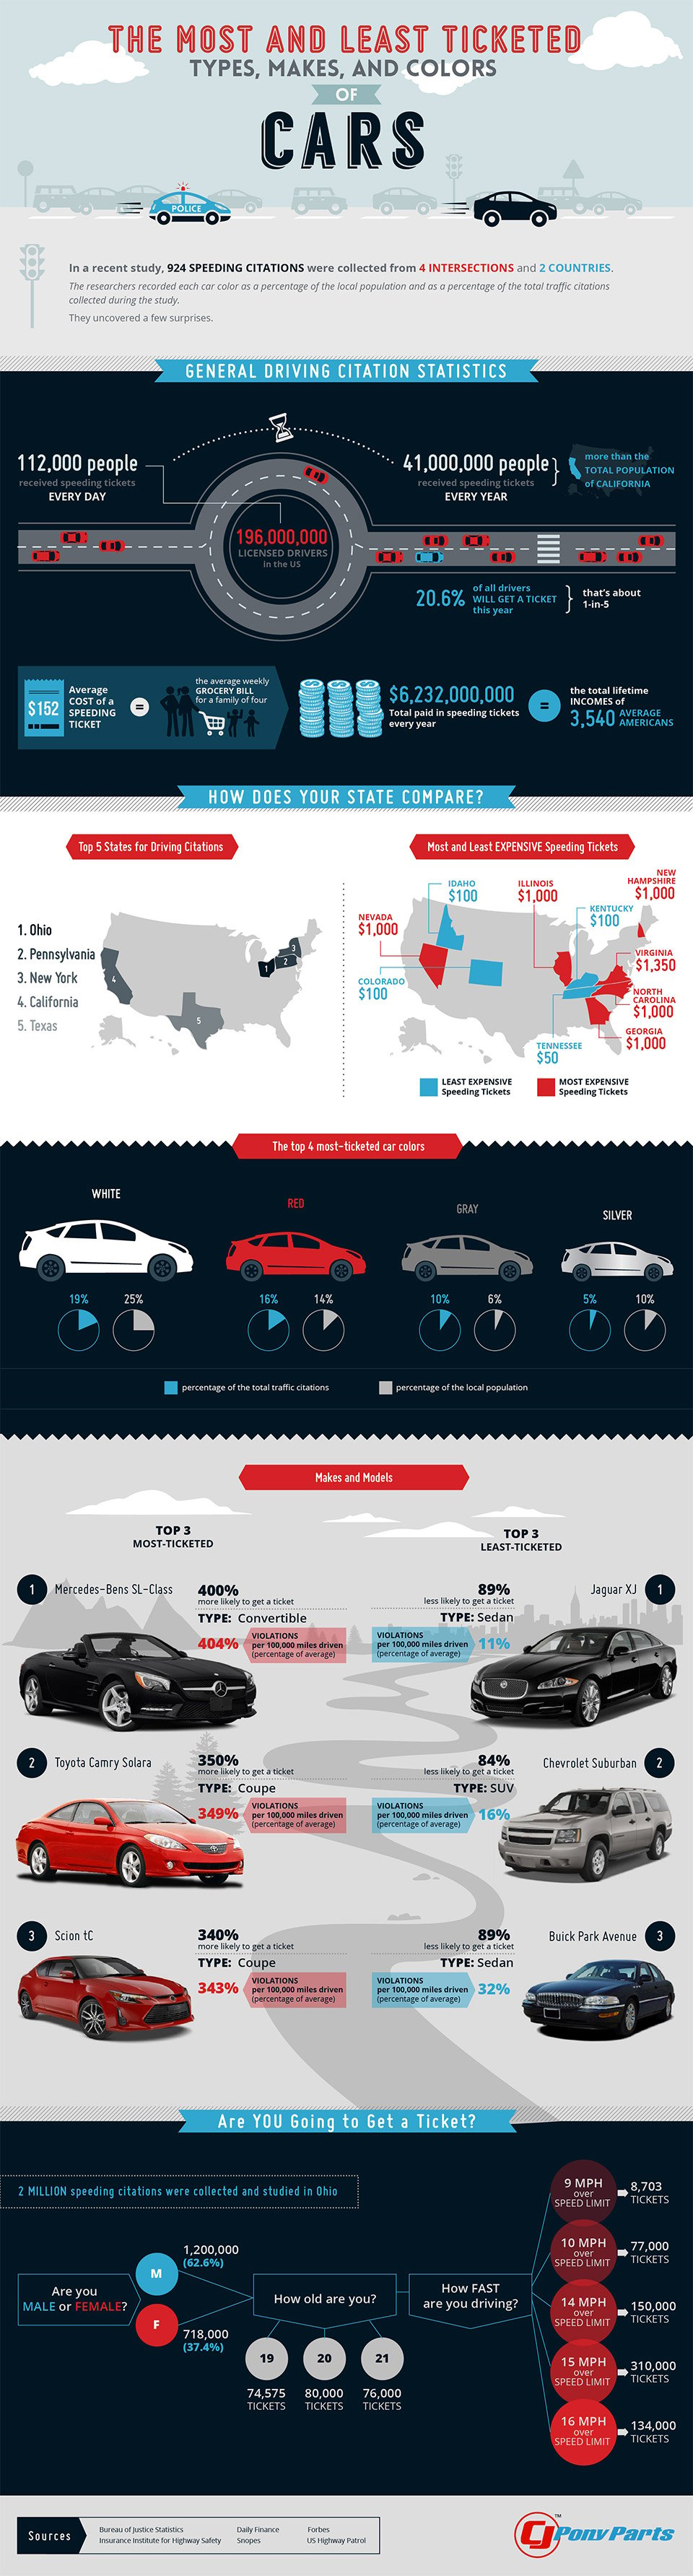 The Most Ticketed Types, Makes & Colors of Cars